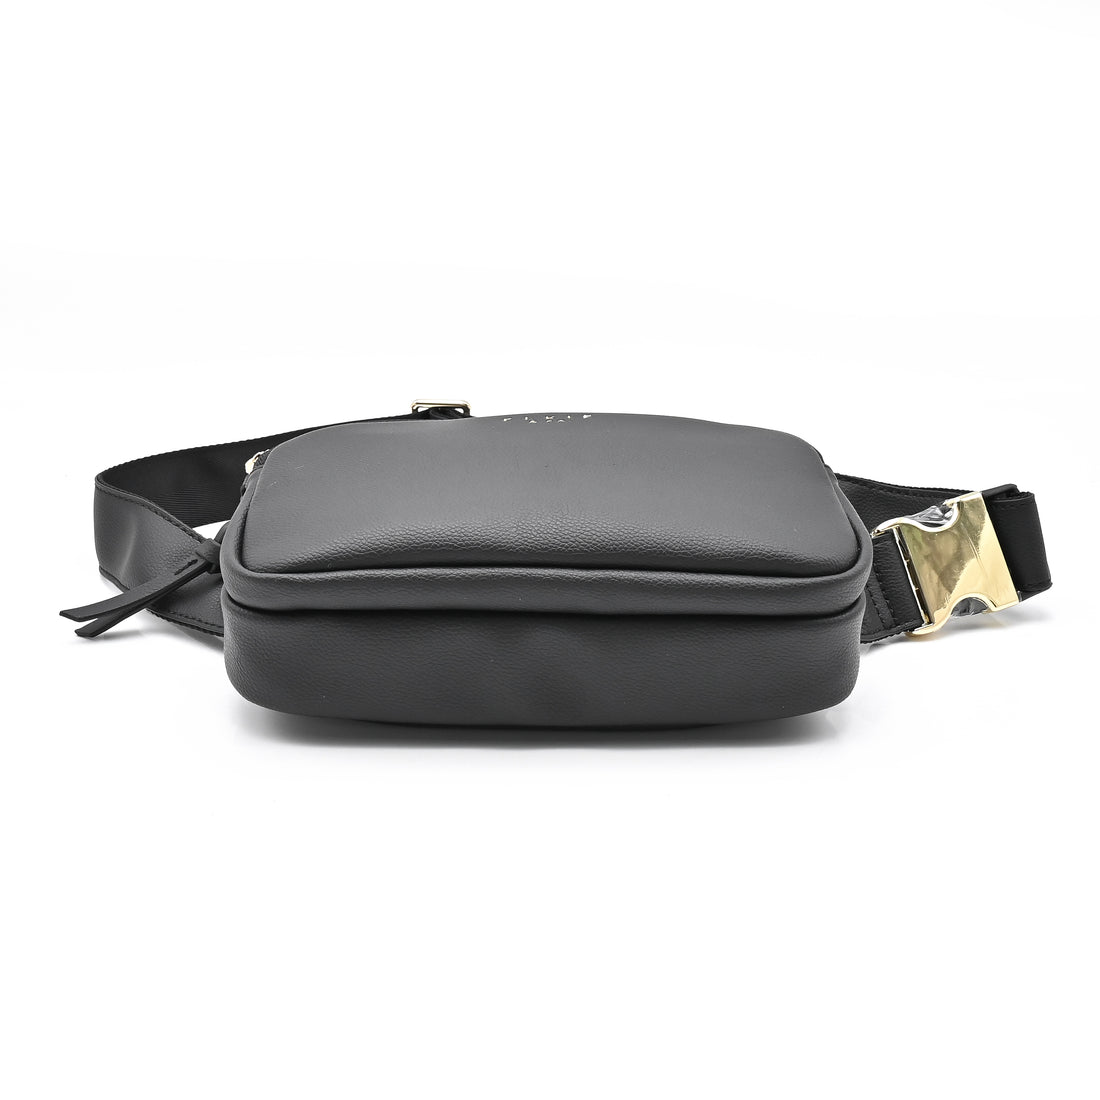 Black leather fanny pack, converts to crossbody